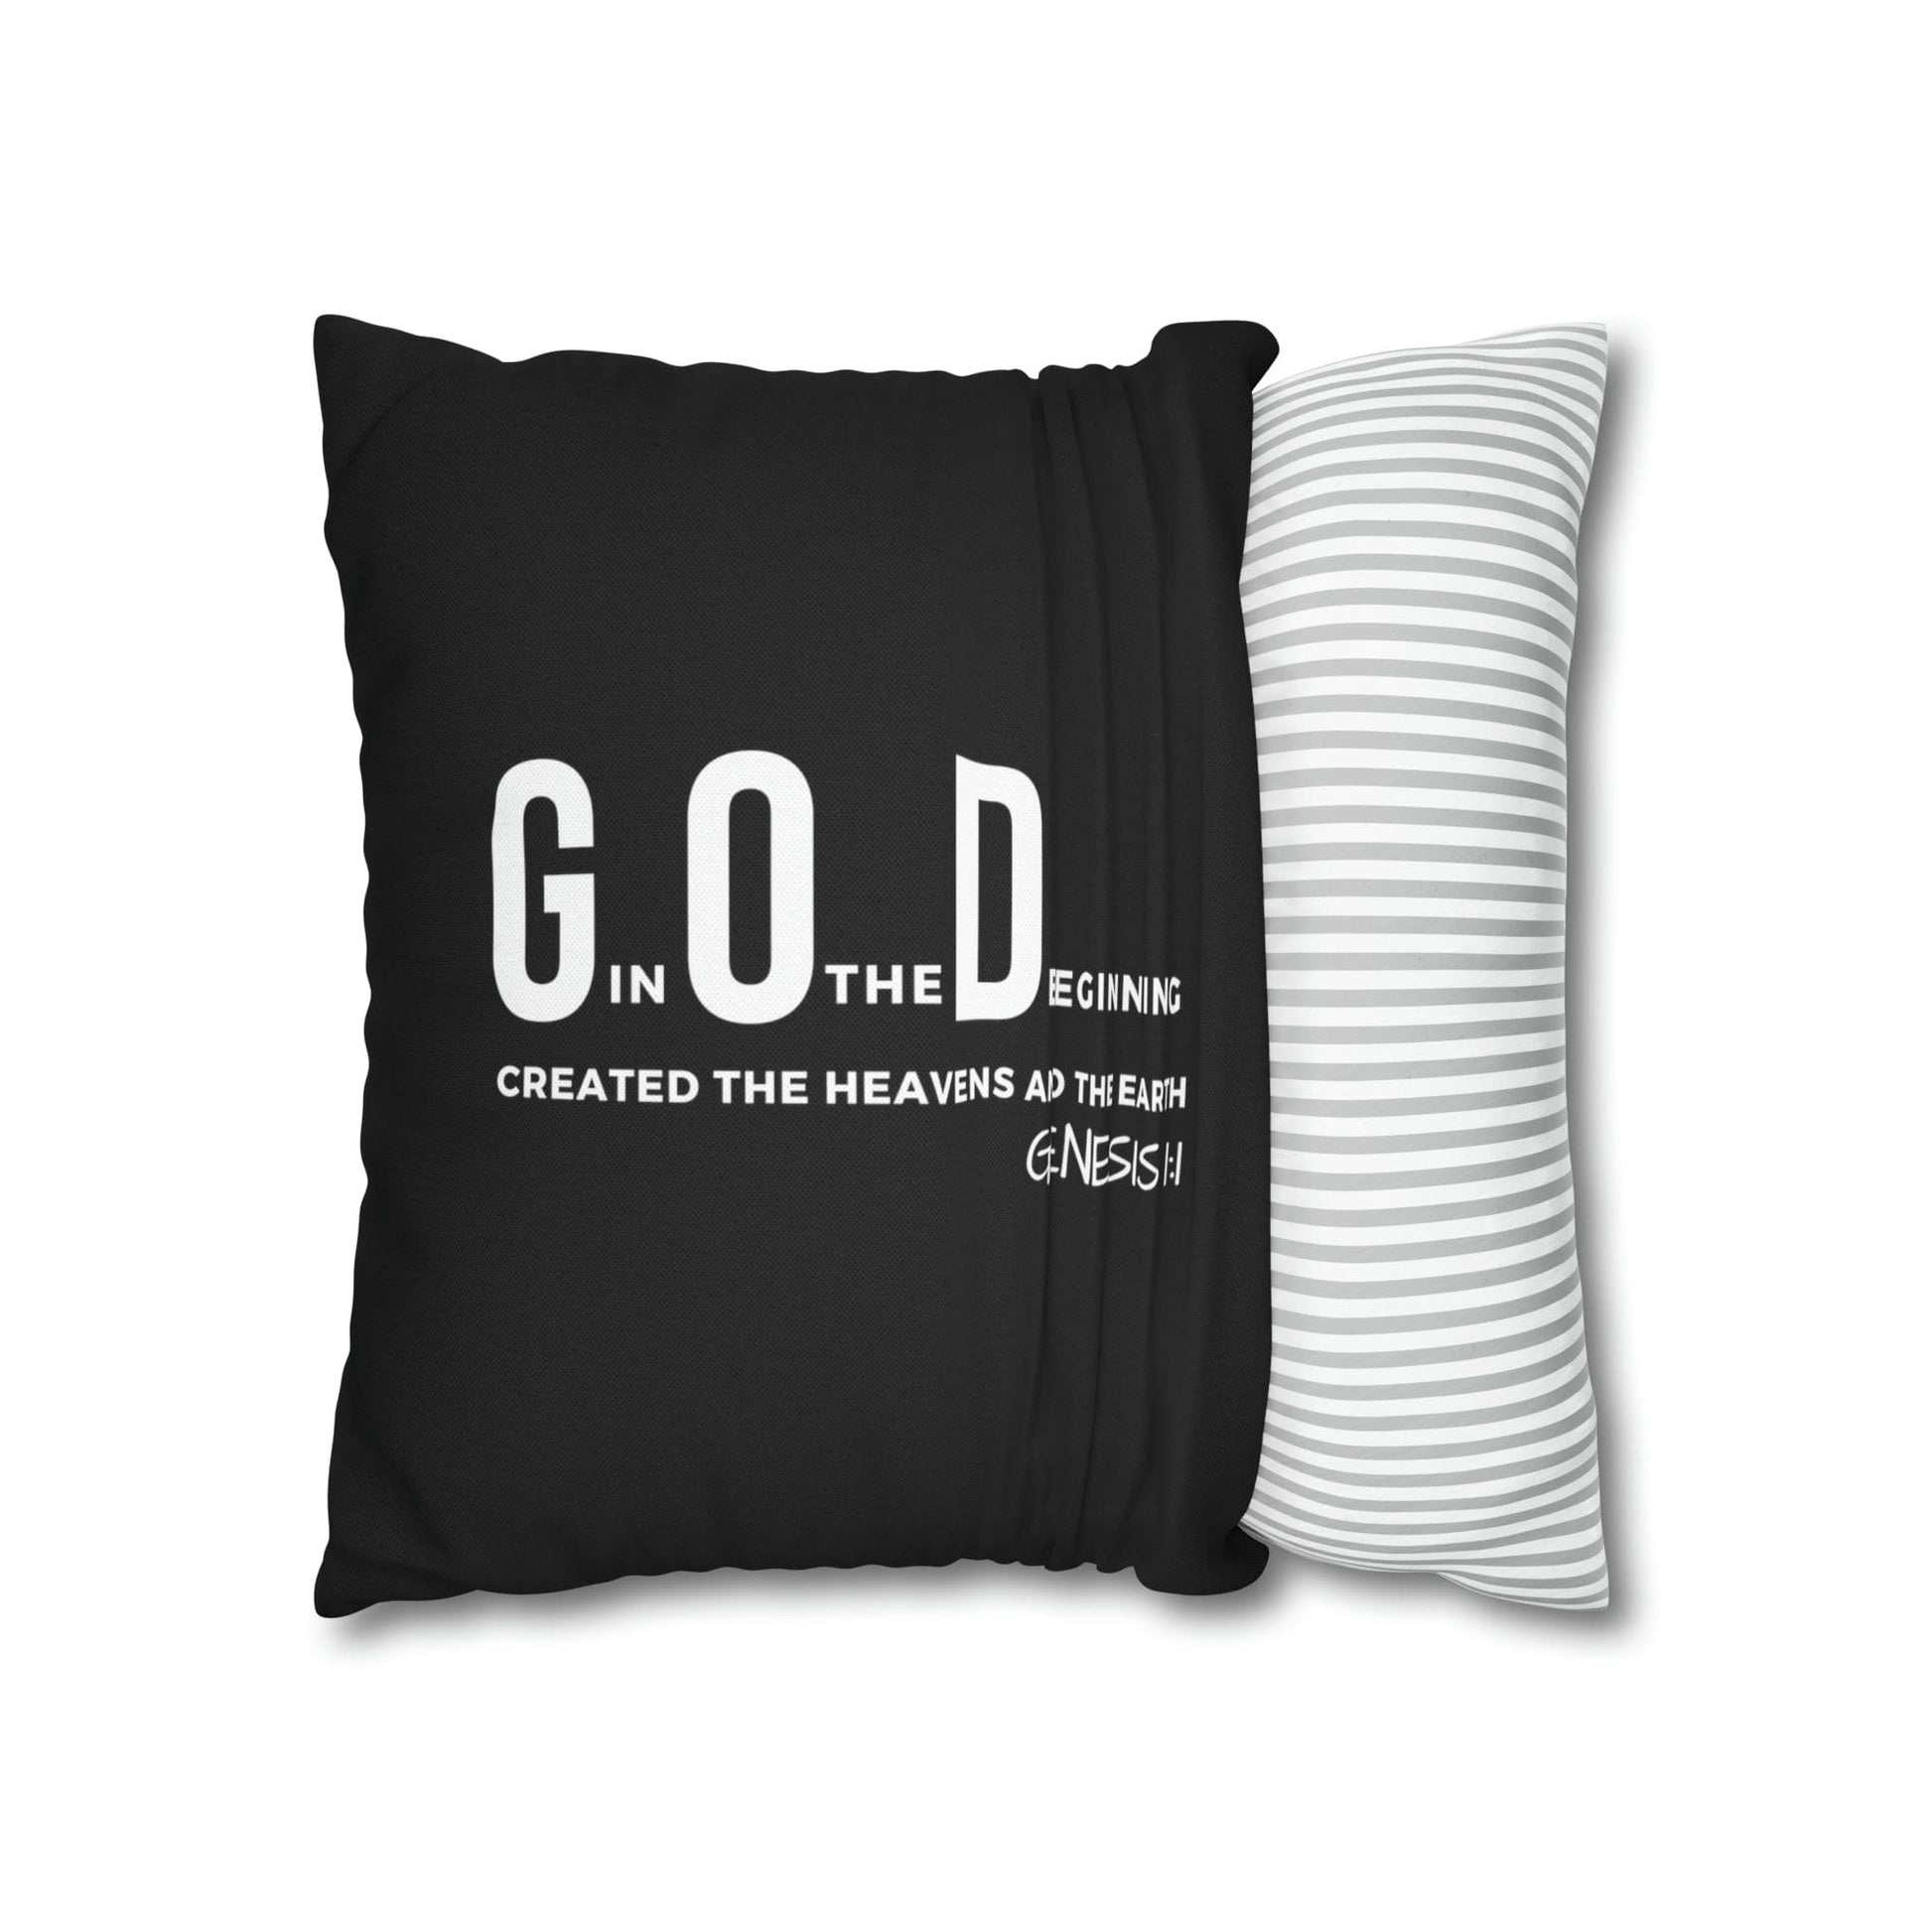 Decorative Throw Pillow Cover - Set Of 2, God In The Beginning Created The Heavens And The Earth - Scripture Verse-18